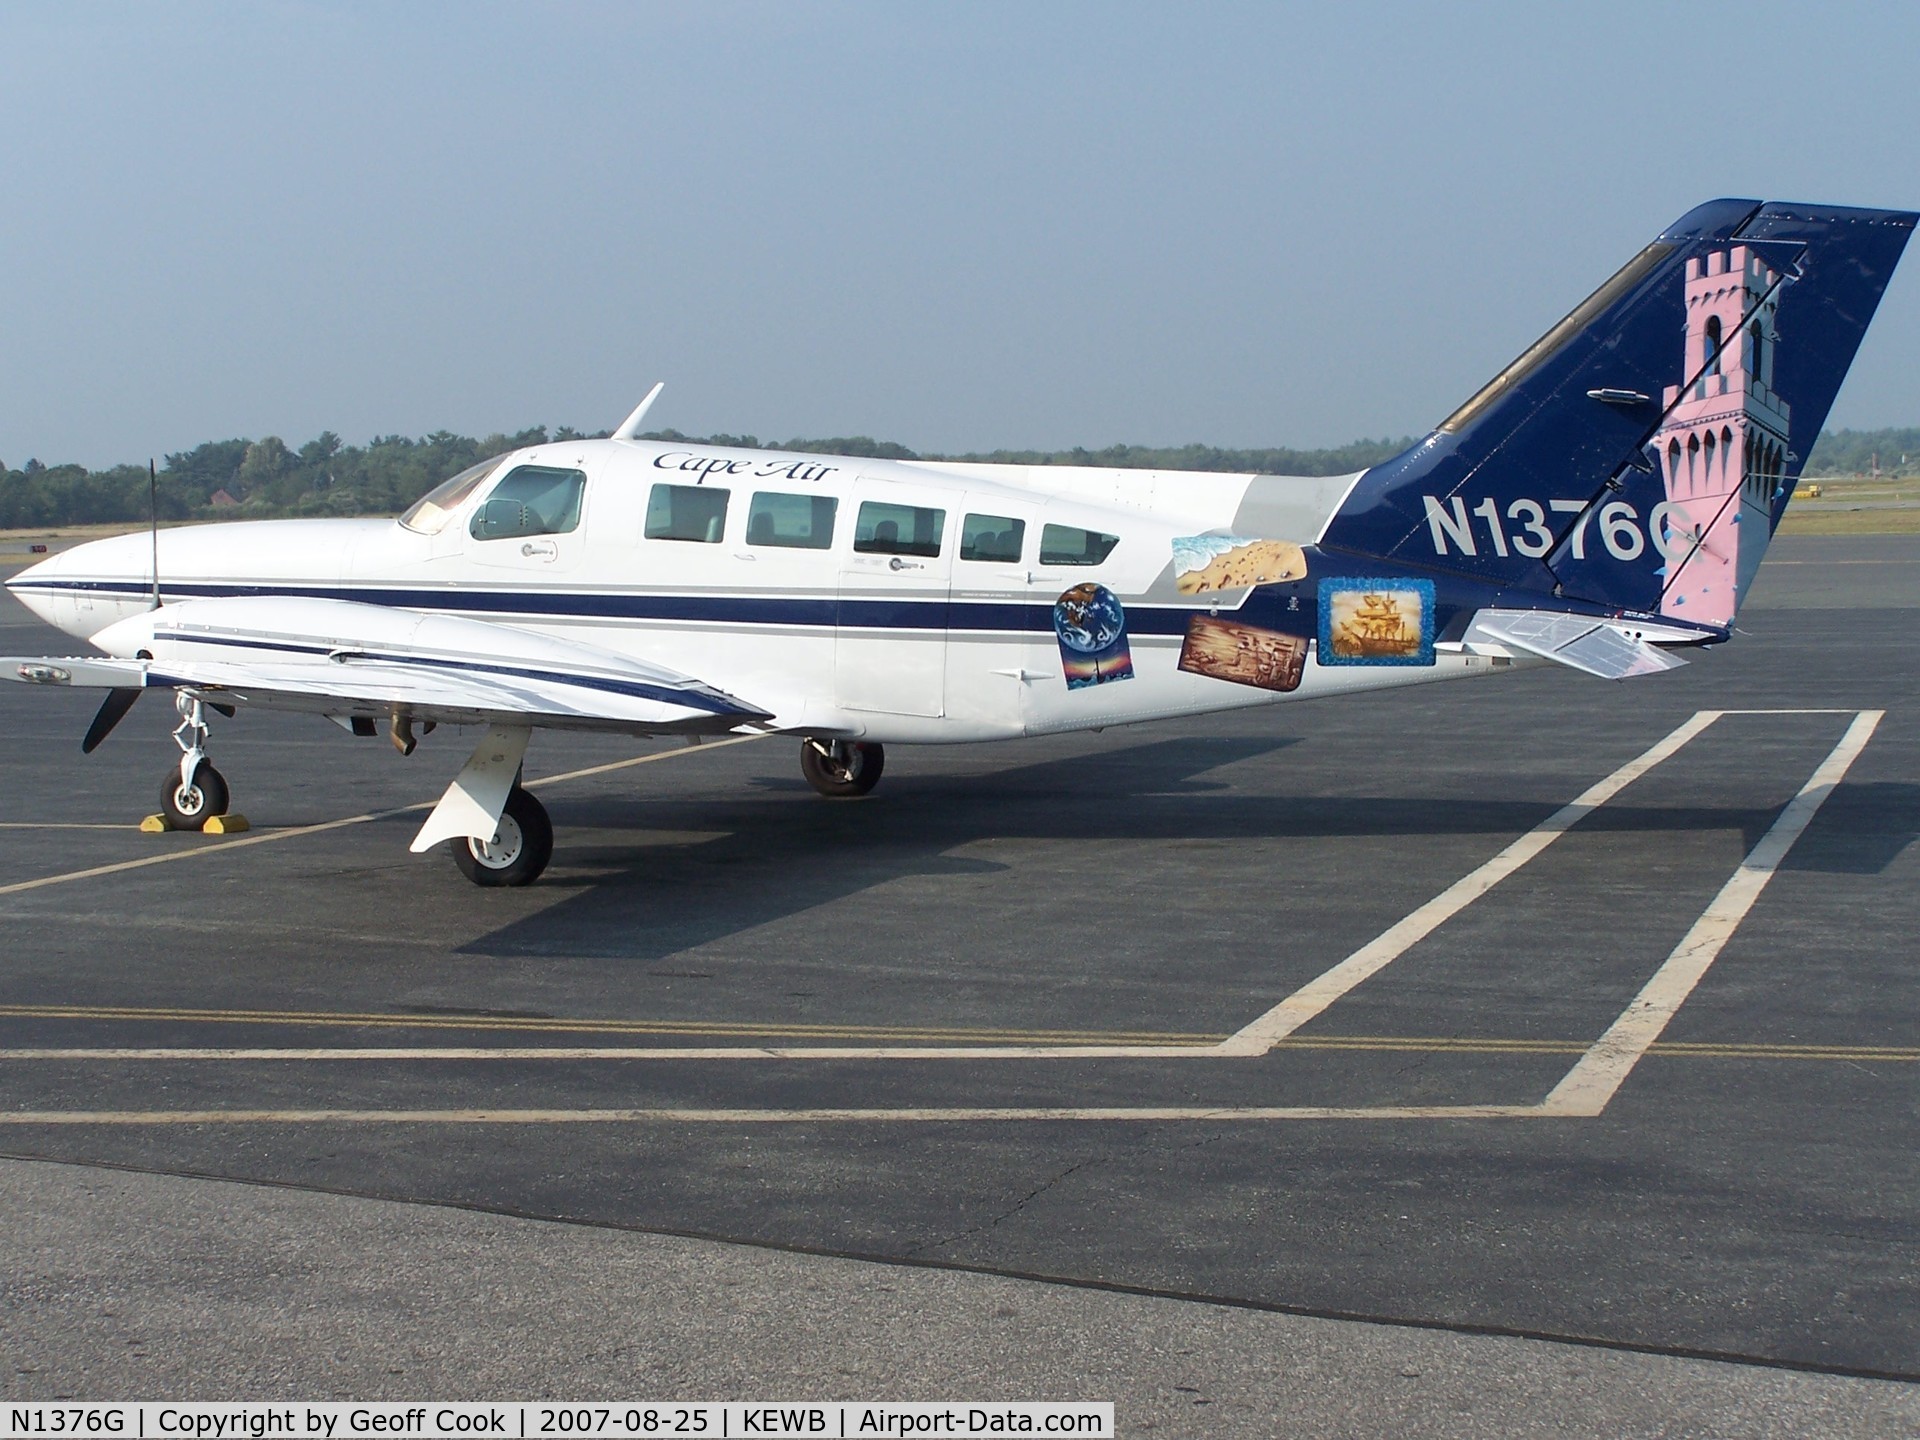 N1376G, 1980 Cessna 402C C/N 402C0271, N1376G with Cape Air is one of several of the company's Cessna 402s with a special livery